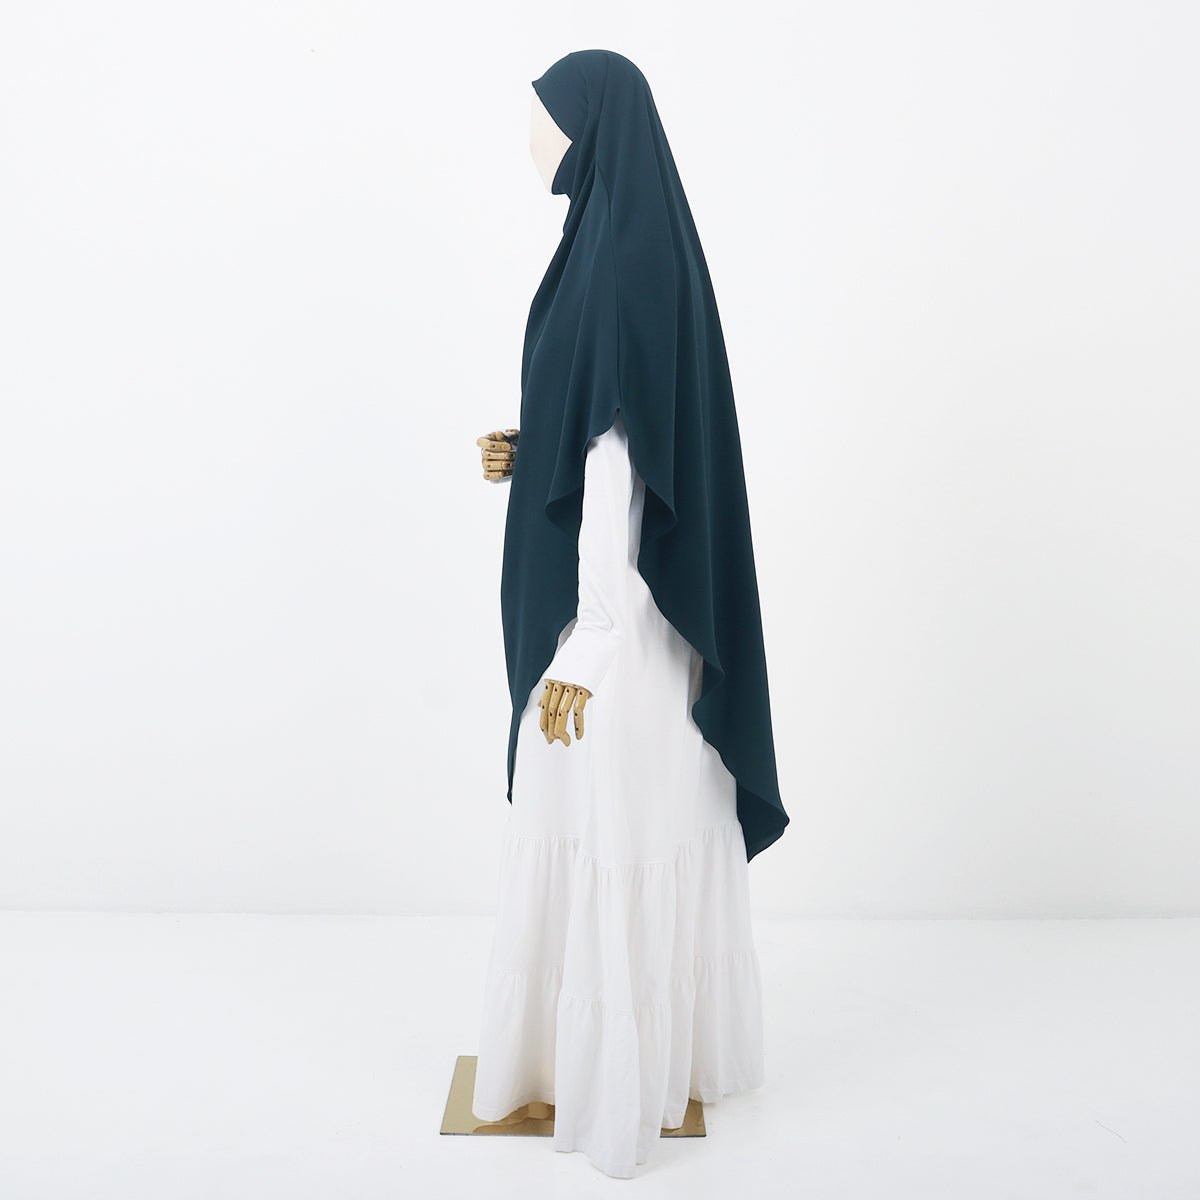 Alesha French Khimar - Ombre Blue